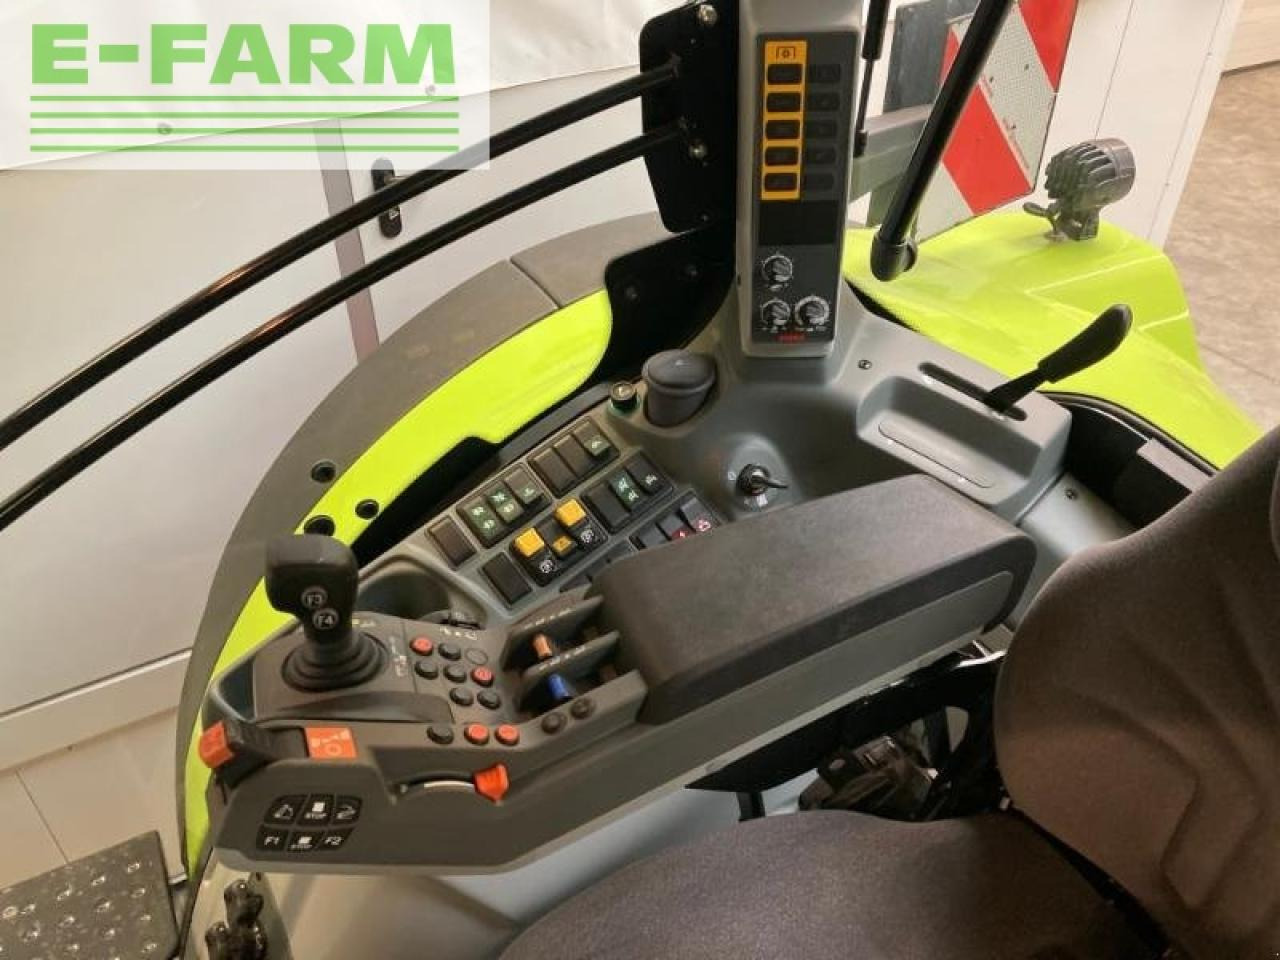 Farm tractor CLAAS arion 650 hexa stage v